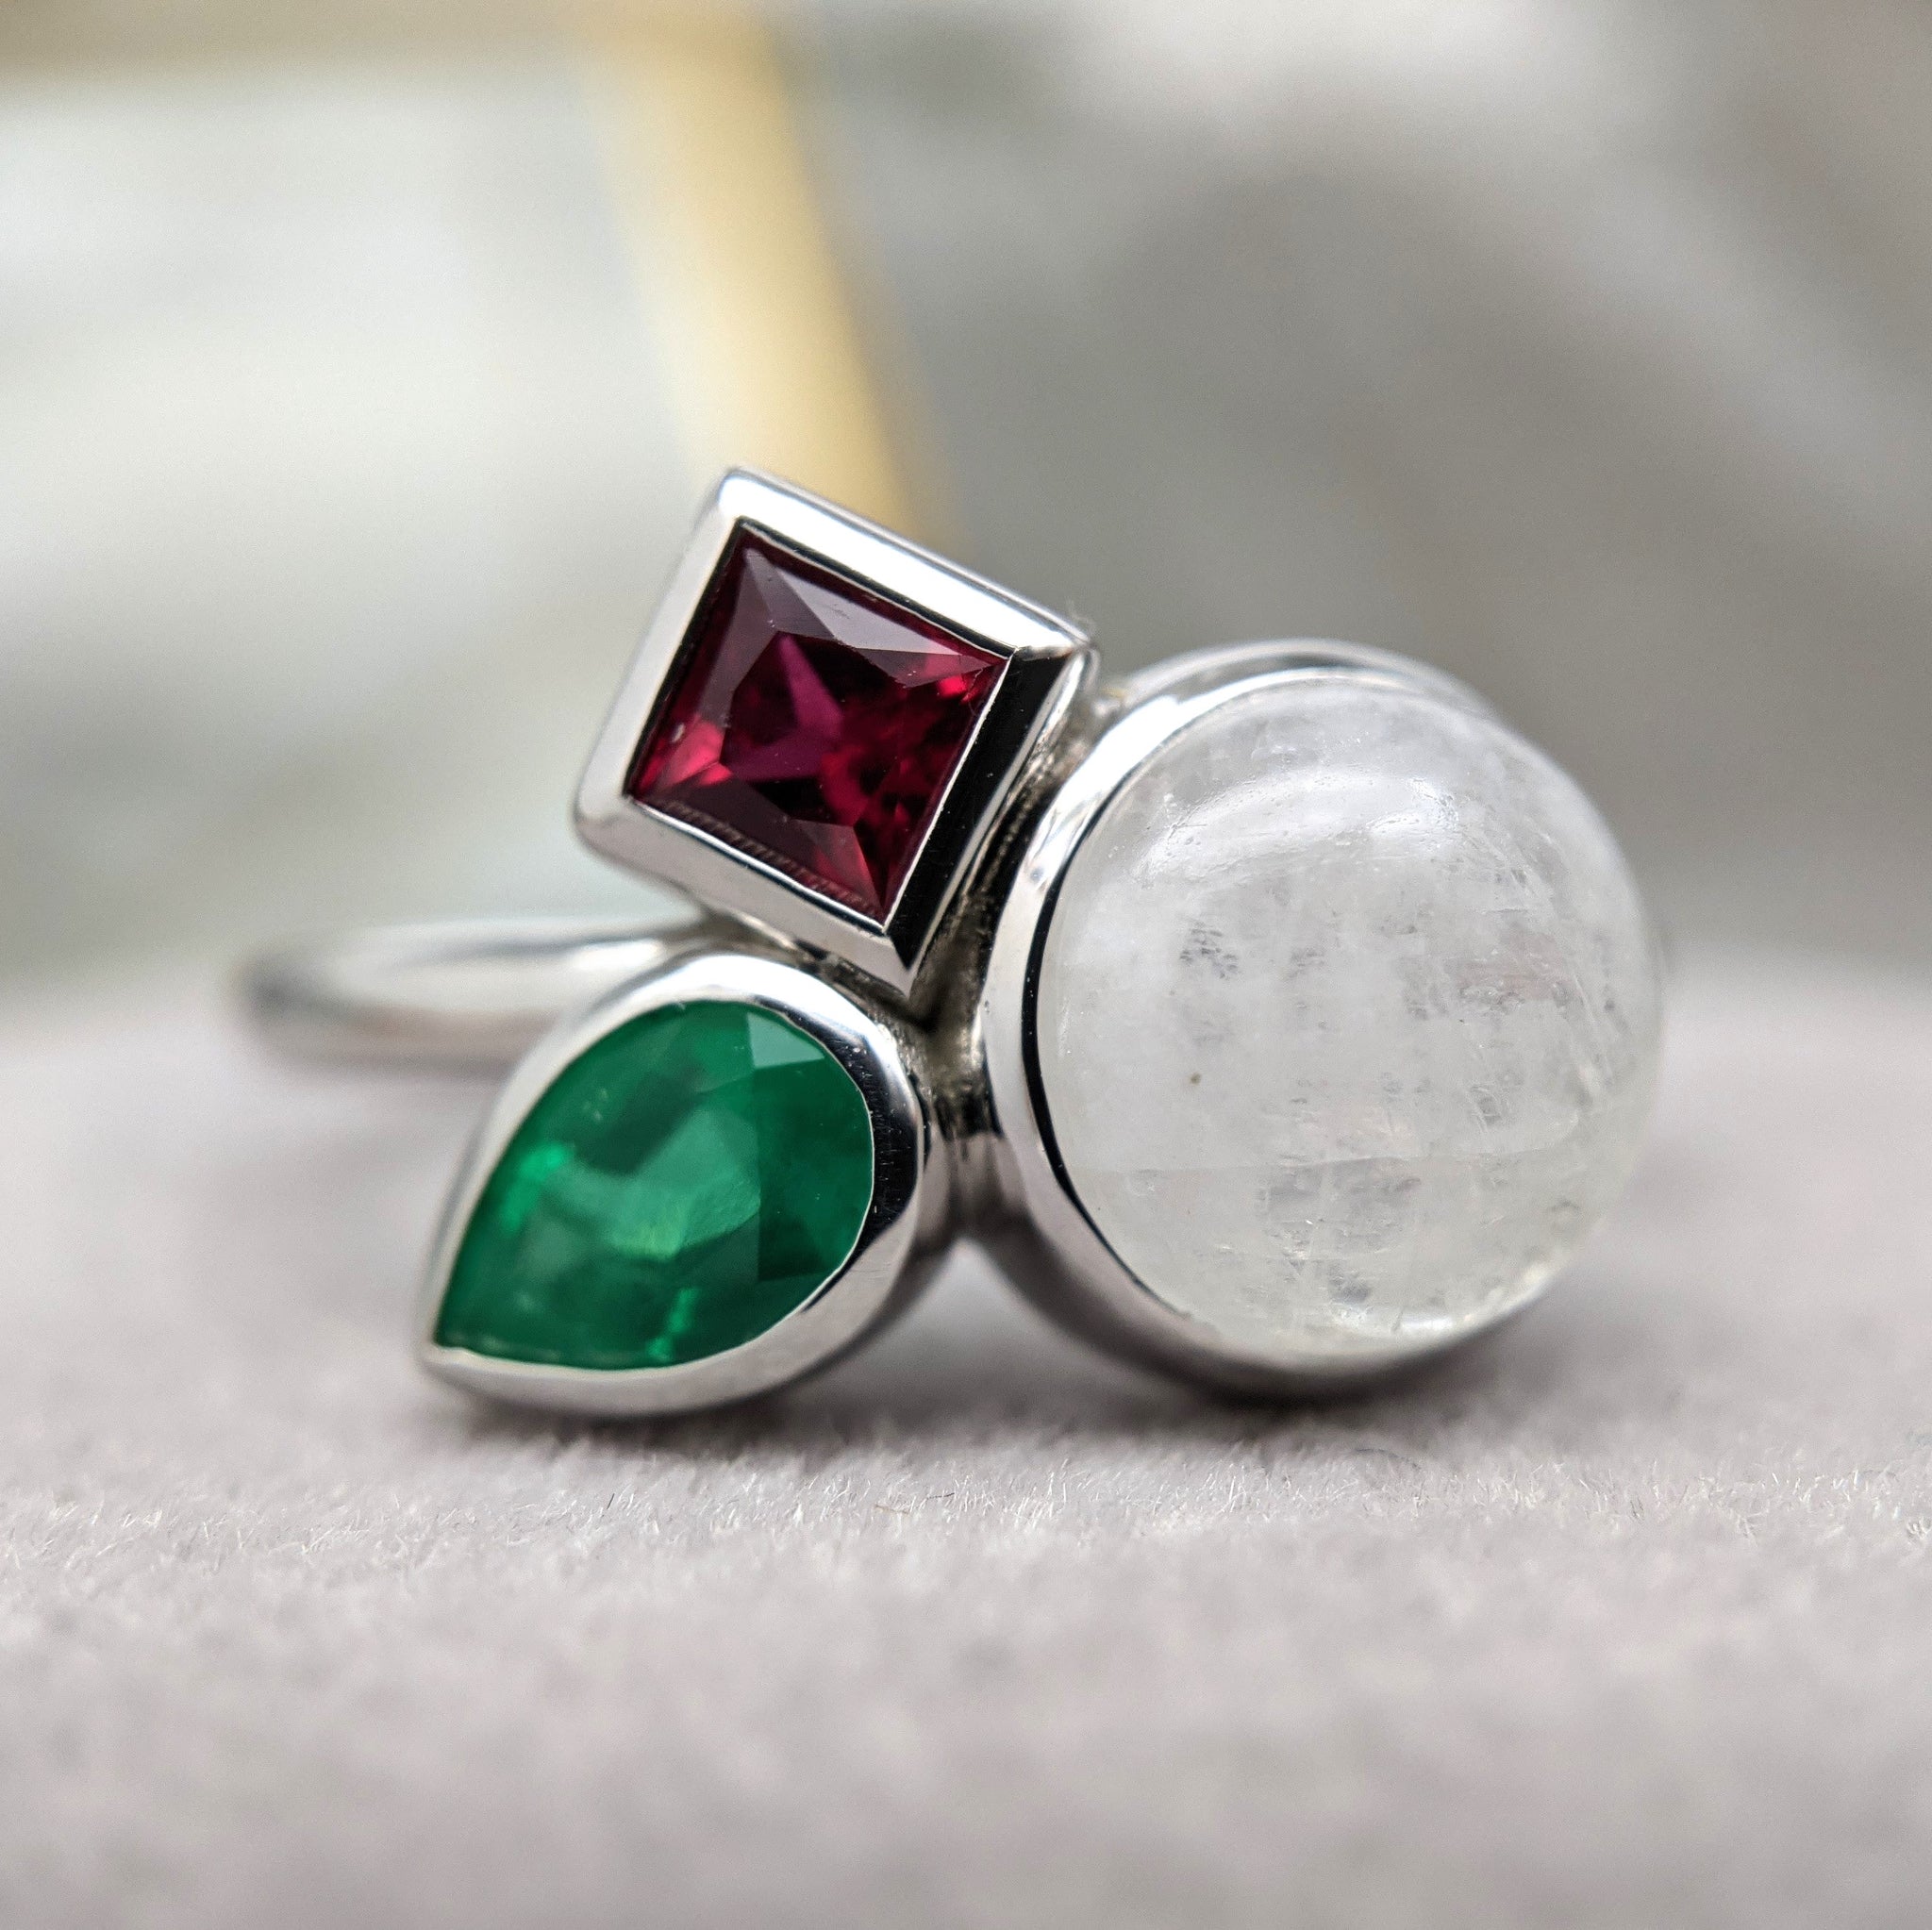 Katie's Birthstone Ring with Moonstone, Ruby, and Emerald